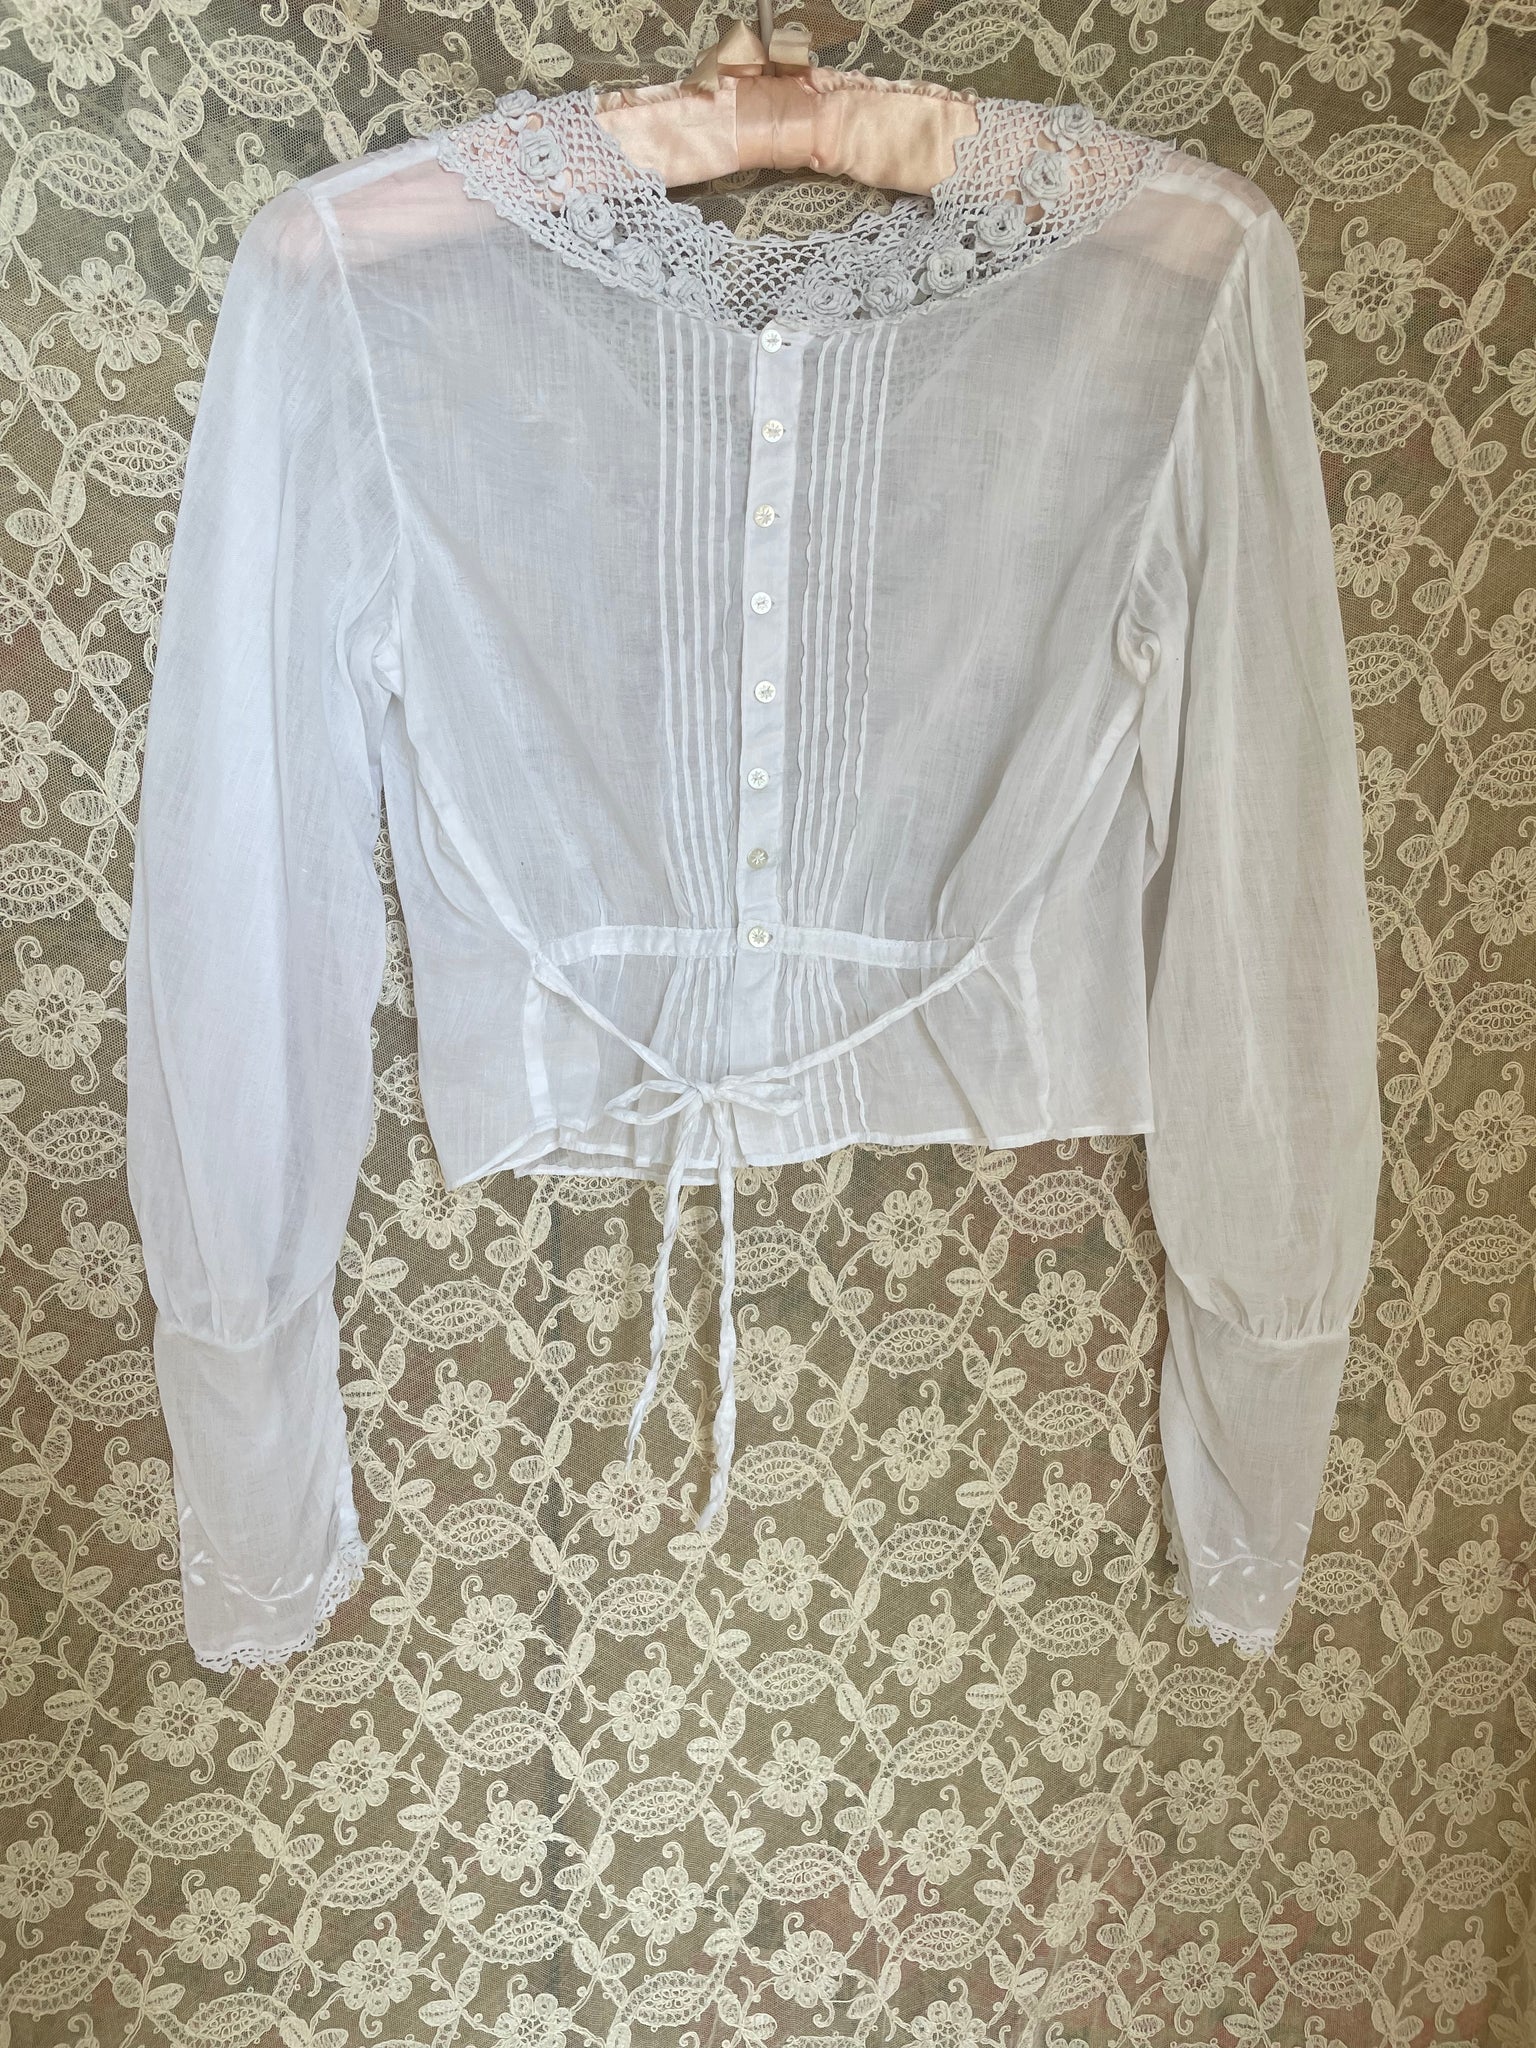 1900s Edwardian White Cotton Blouse Rose Crochet Collar Embroidery Mother of Pearl